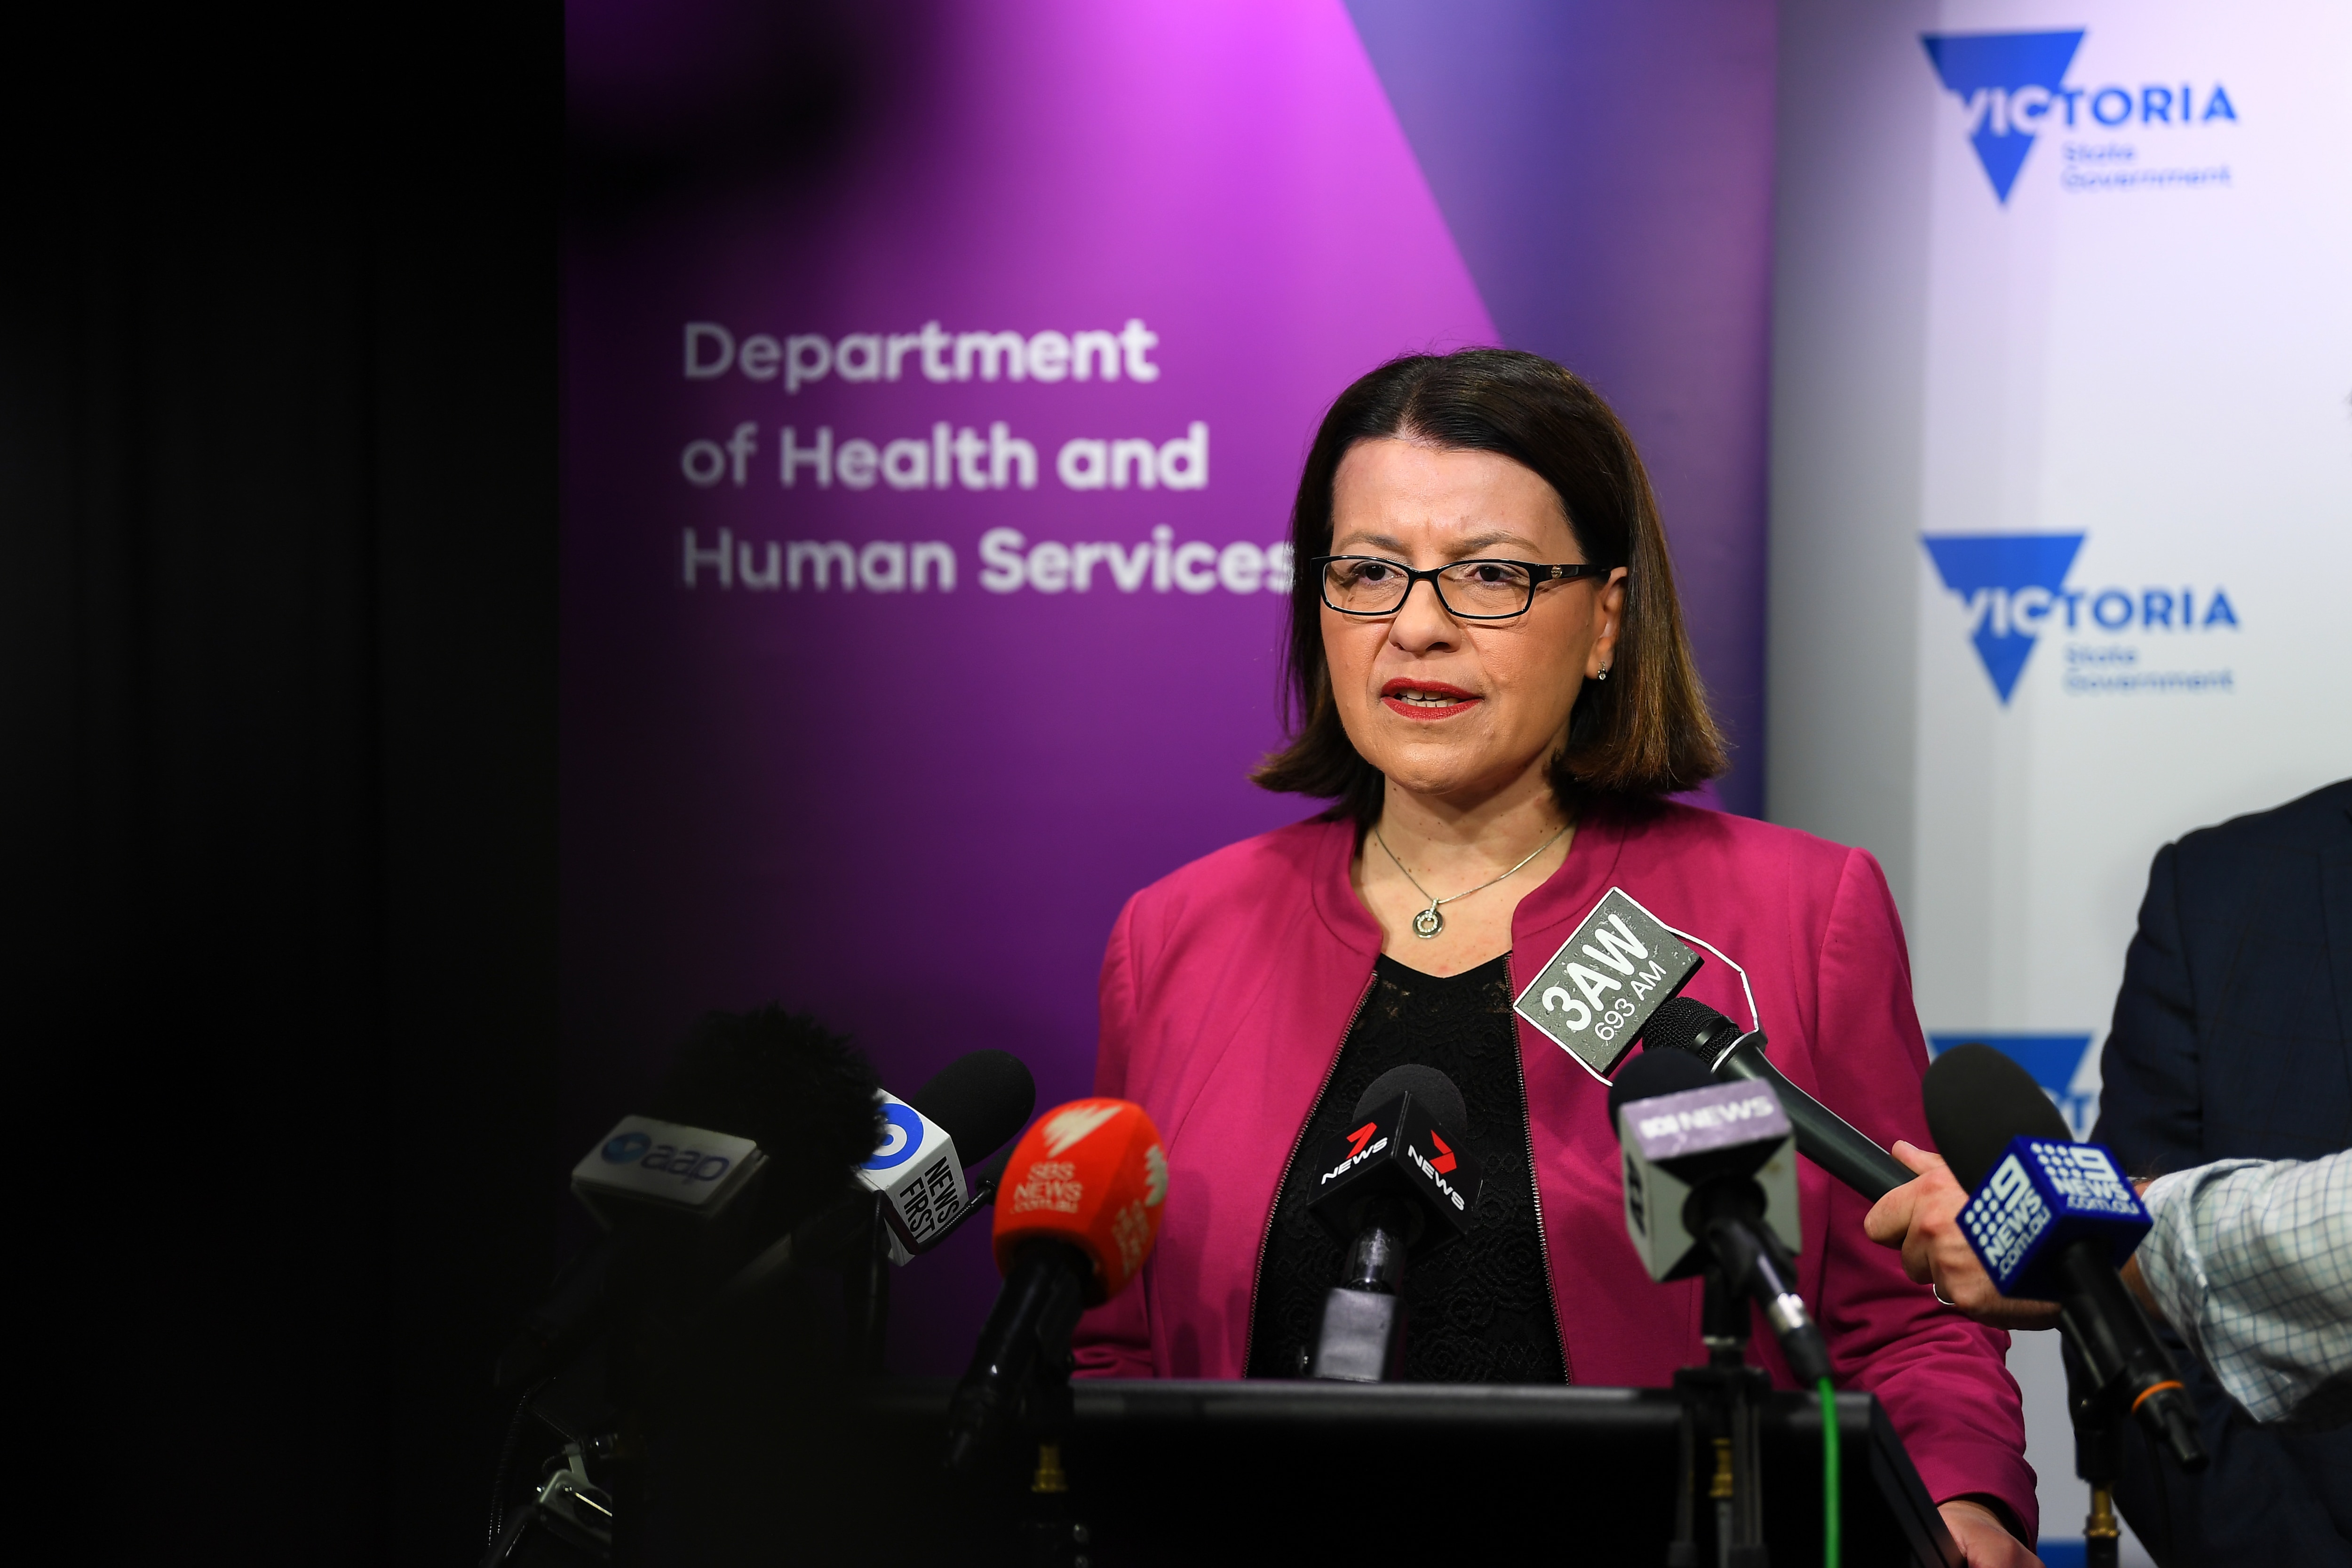 Victorian Health Minister Jenny Mikakos speaks to media during a press conference at the Department of Health and Human Services offices in Melbourne, Monday, March 2, 2020. An update has been provided Corona Virus. (AAP Image/James Ross) NO ARCHIVING